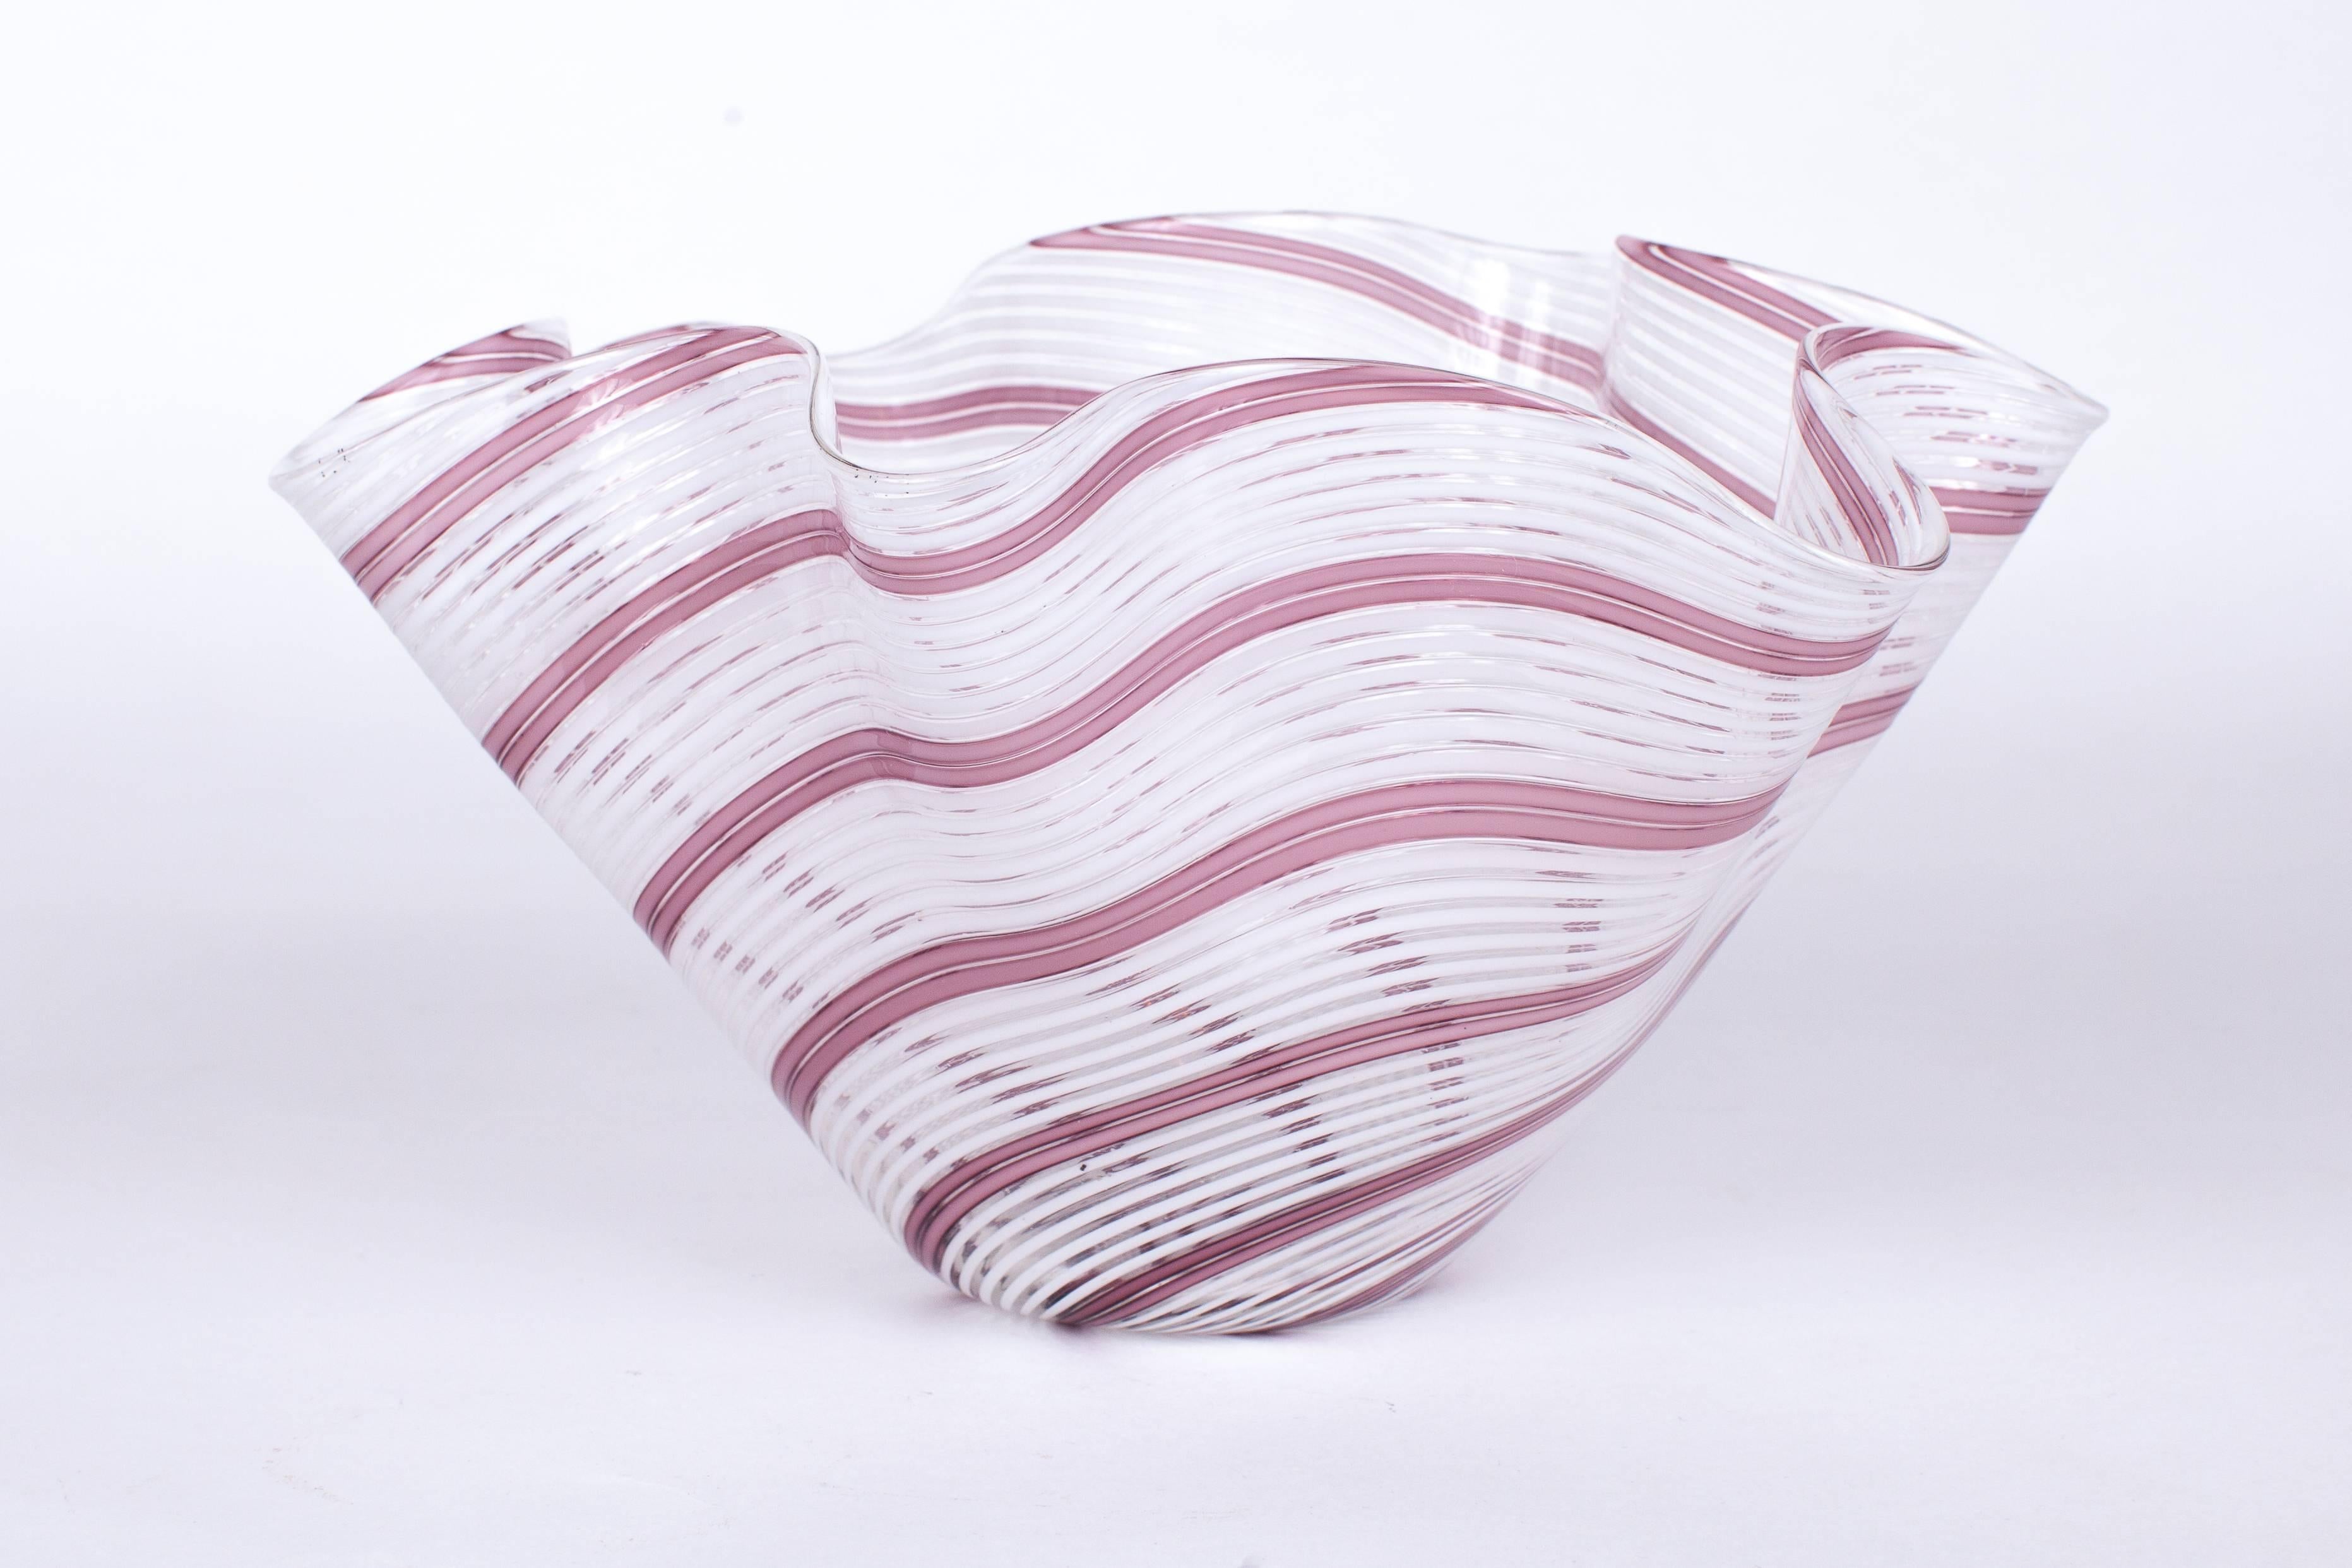 Dino Martens (1894–1970)

Large, lively Murano vase in striped blown glass by Dino Martens for Aureliano Toso, a distinctive 